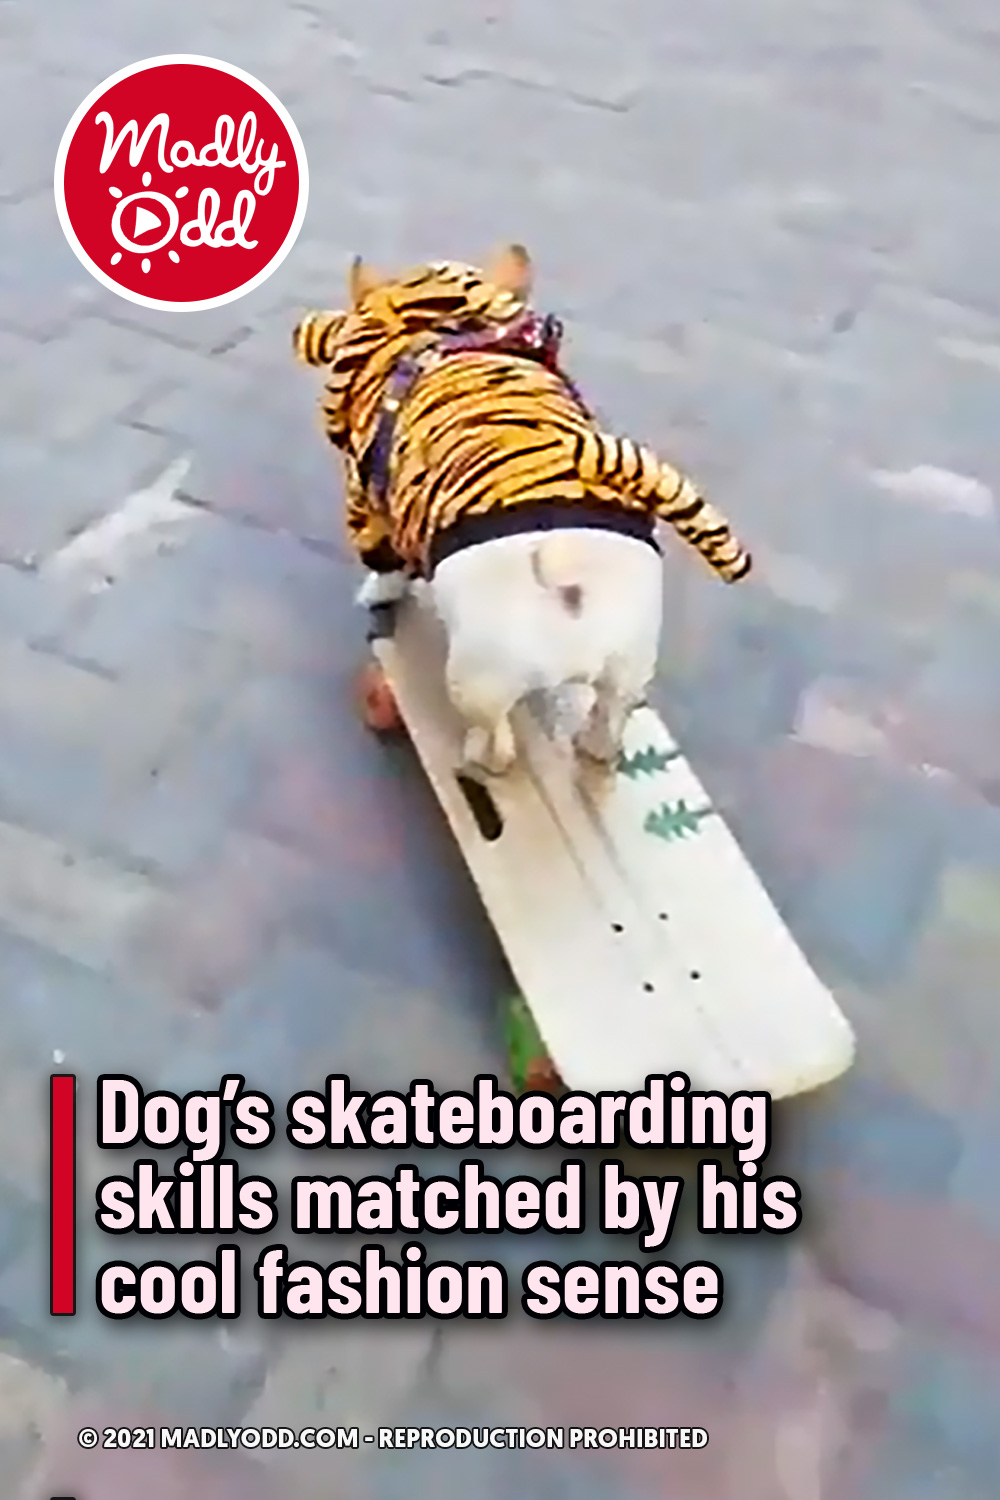 Dog’s skateboarding skills matched by his cool fashion sense